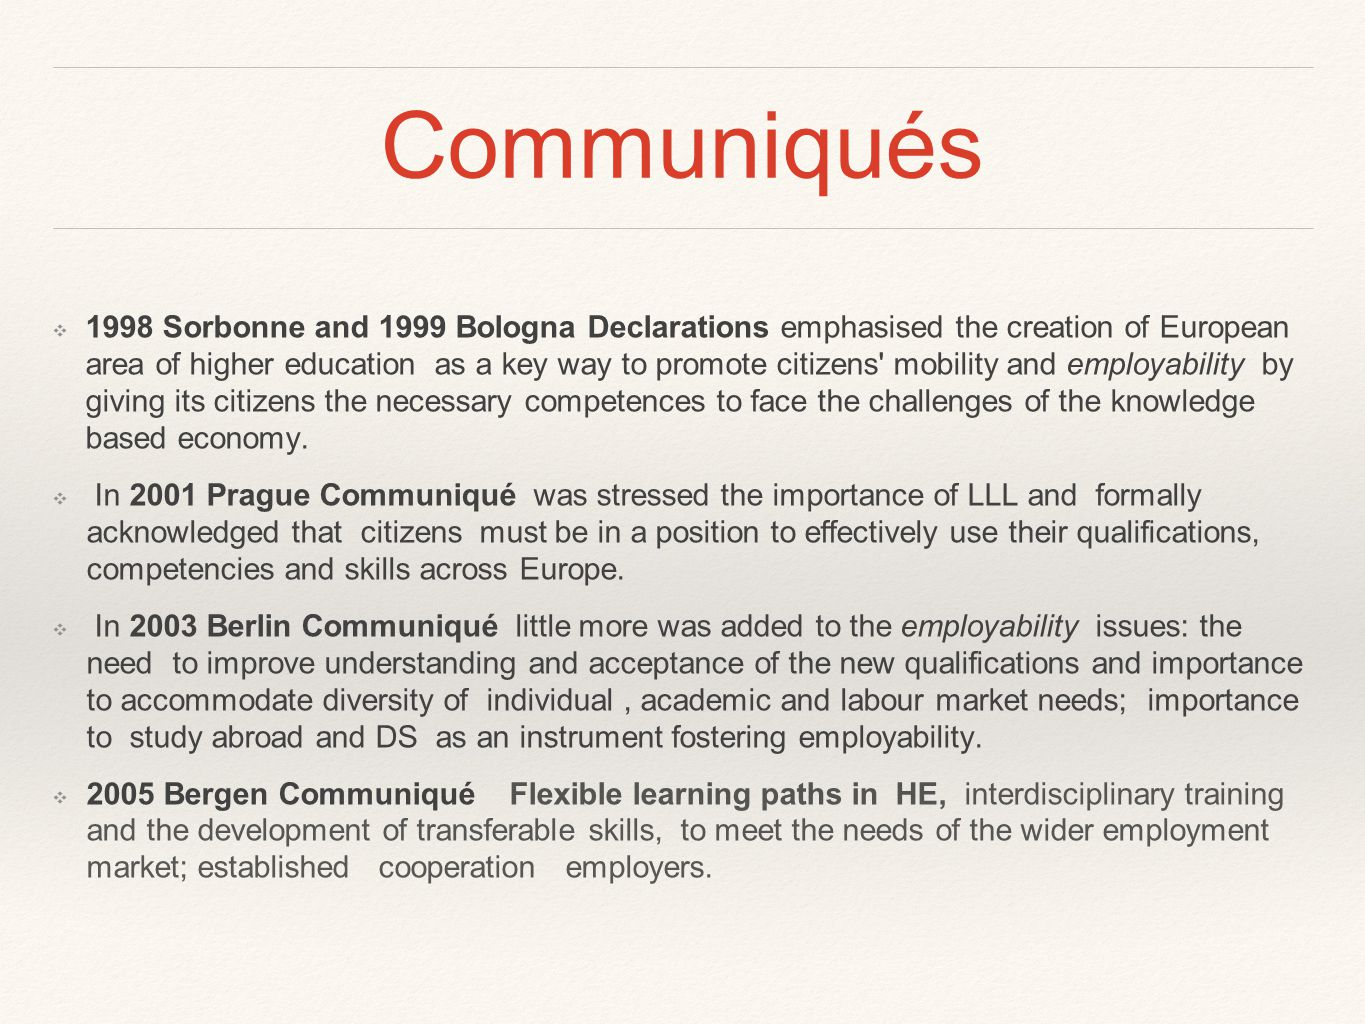 Communiqués ❖ 1998 Sorbonne and 1999 Bologna Declarations emphasised the creation of European area of higher education as a key way to promote citizens mobility and employability by giving its citizens the necessary competences to face the challenges of the knowledge based economy.